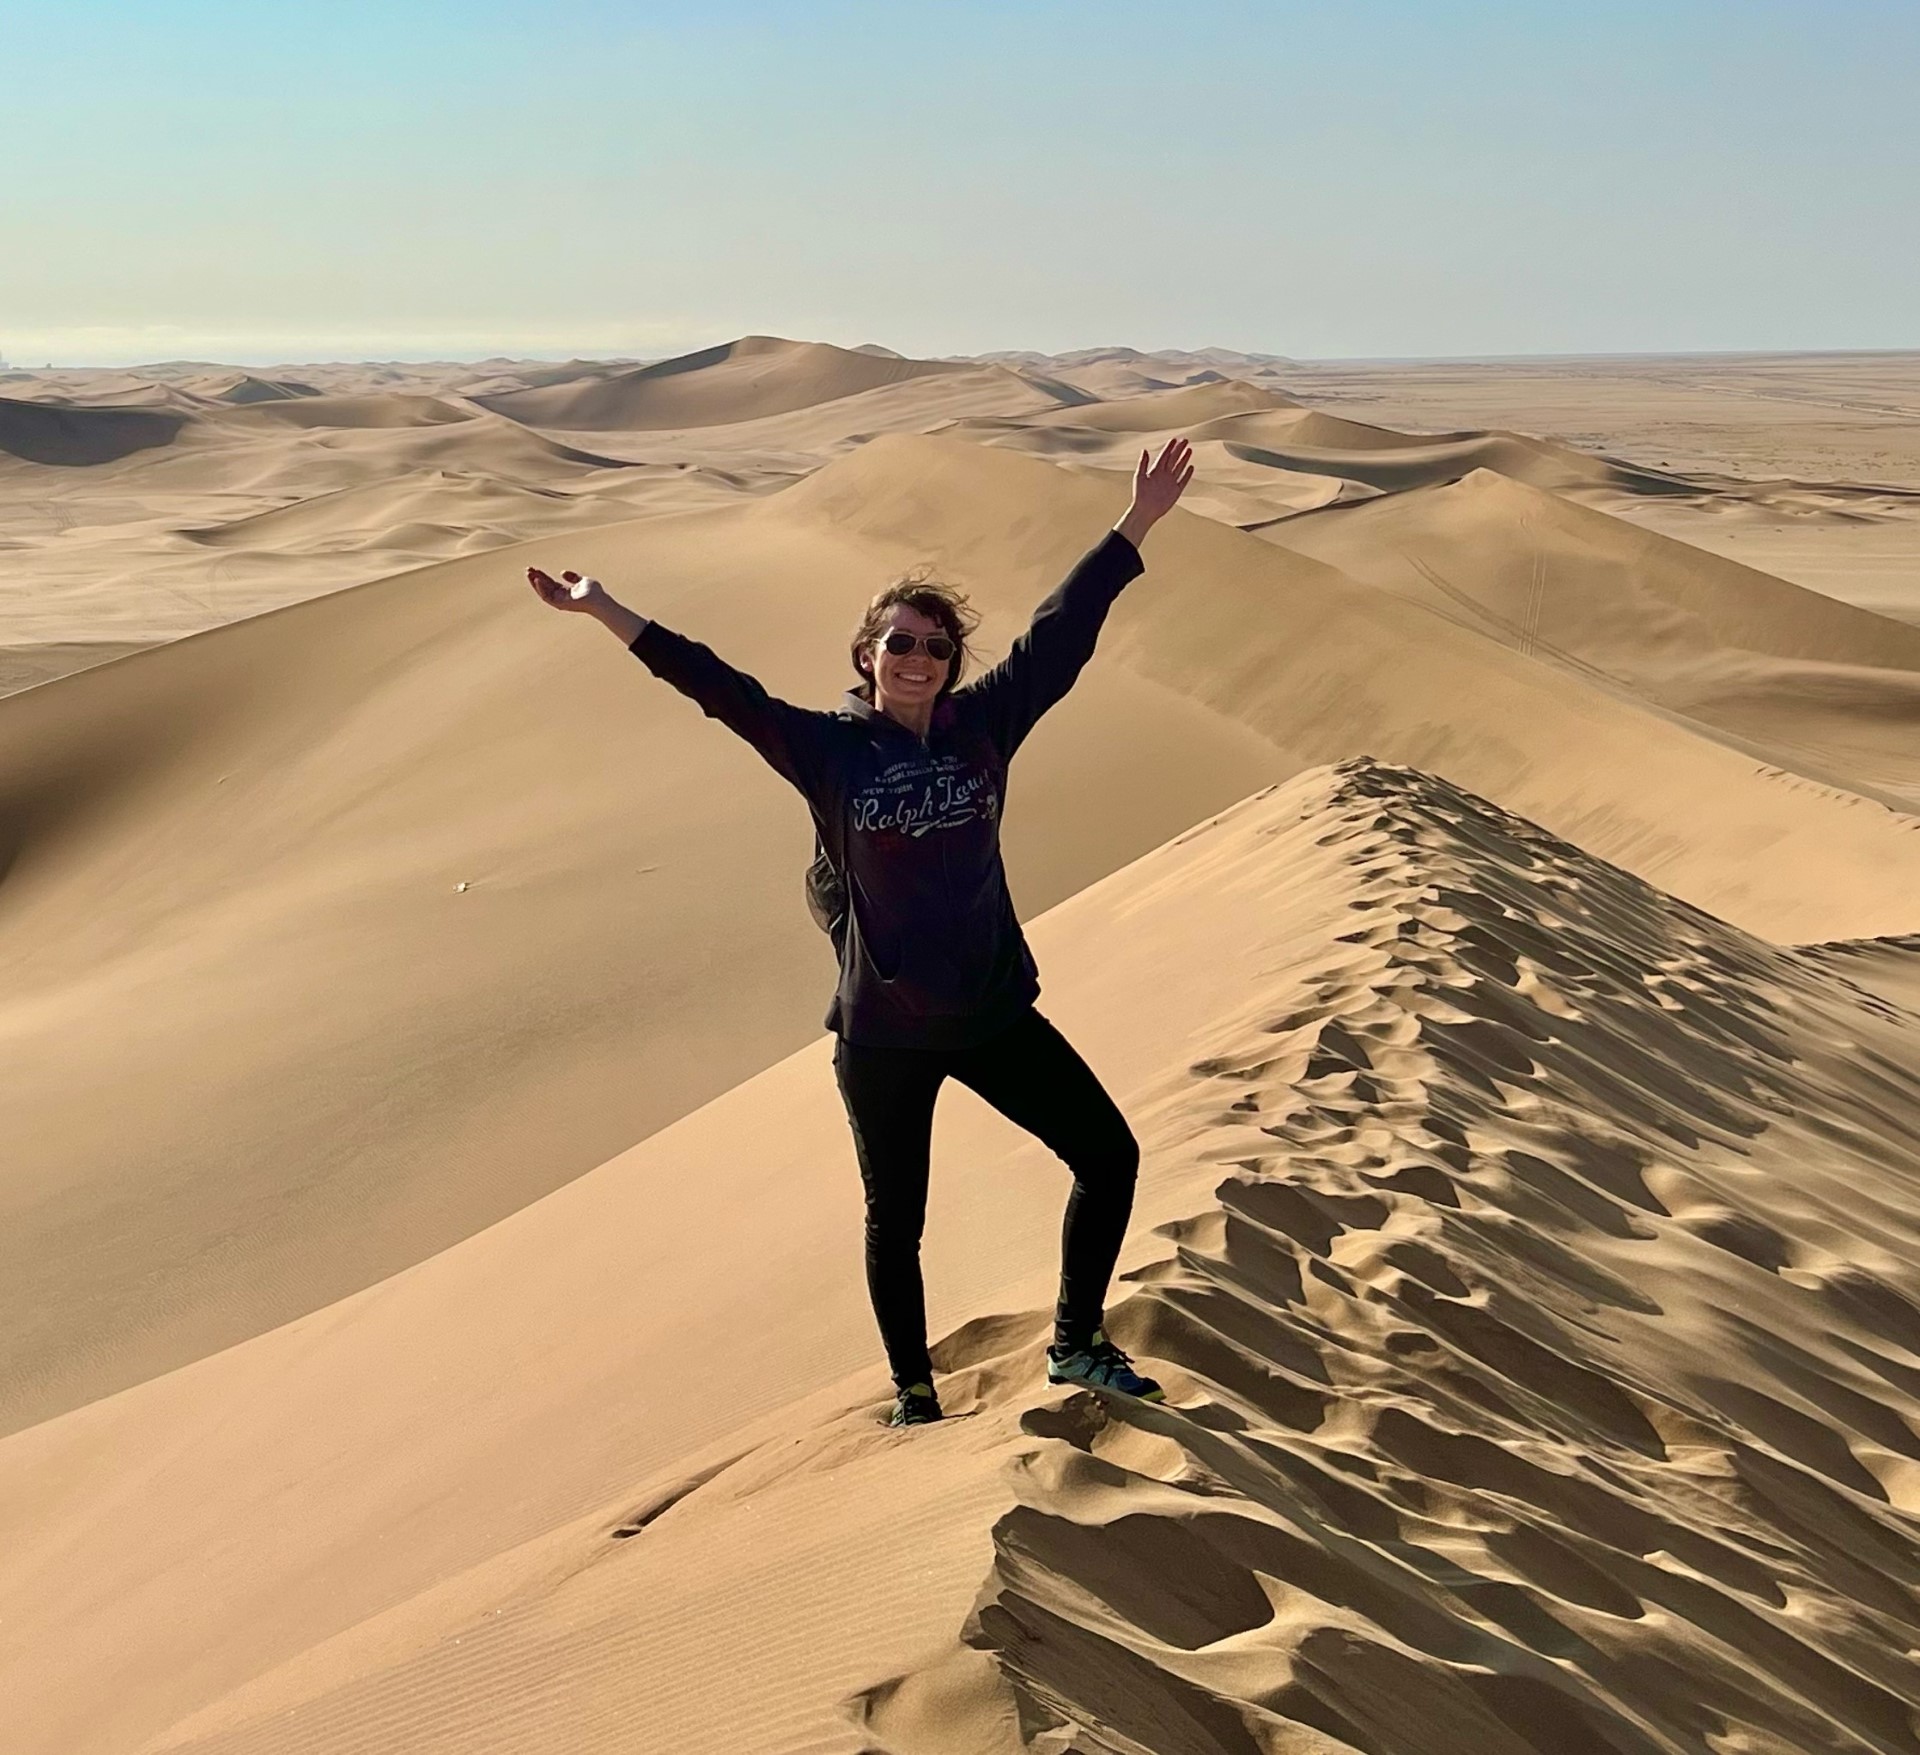 Christine Roviera on top of dunes in Namibia.